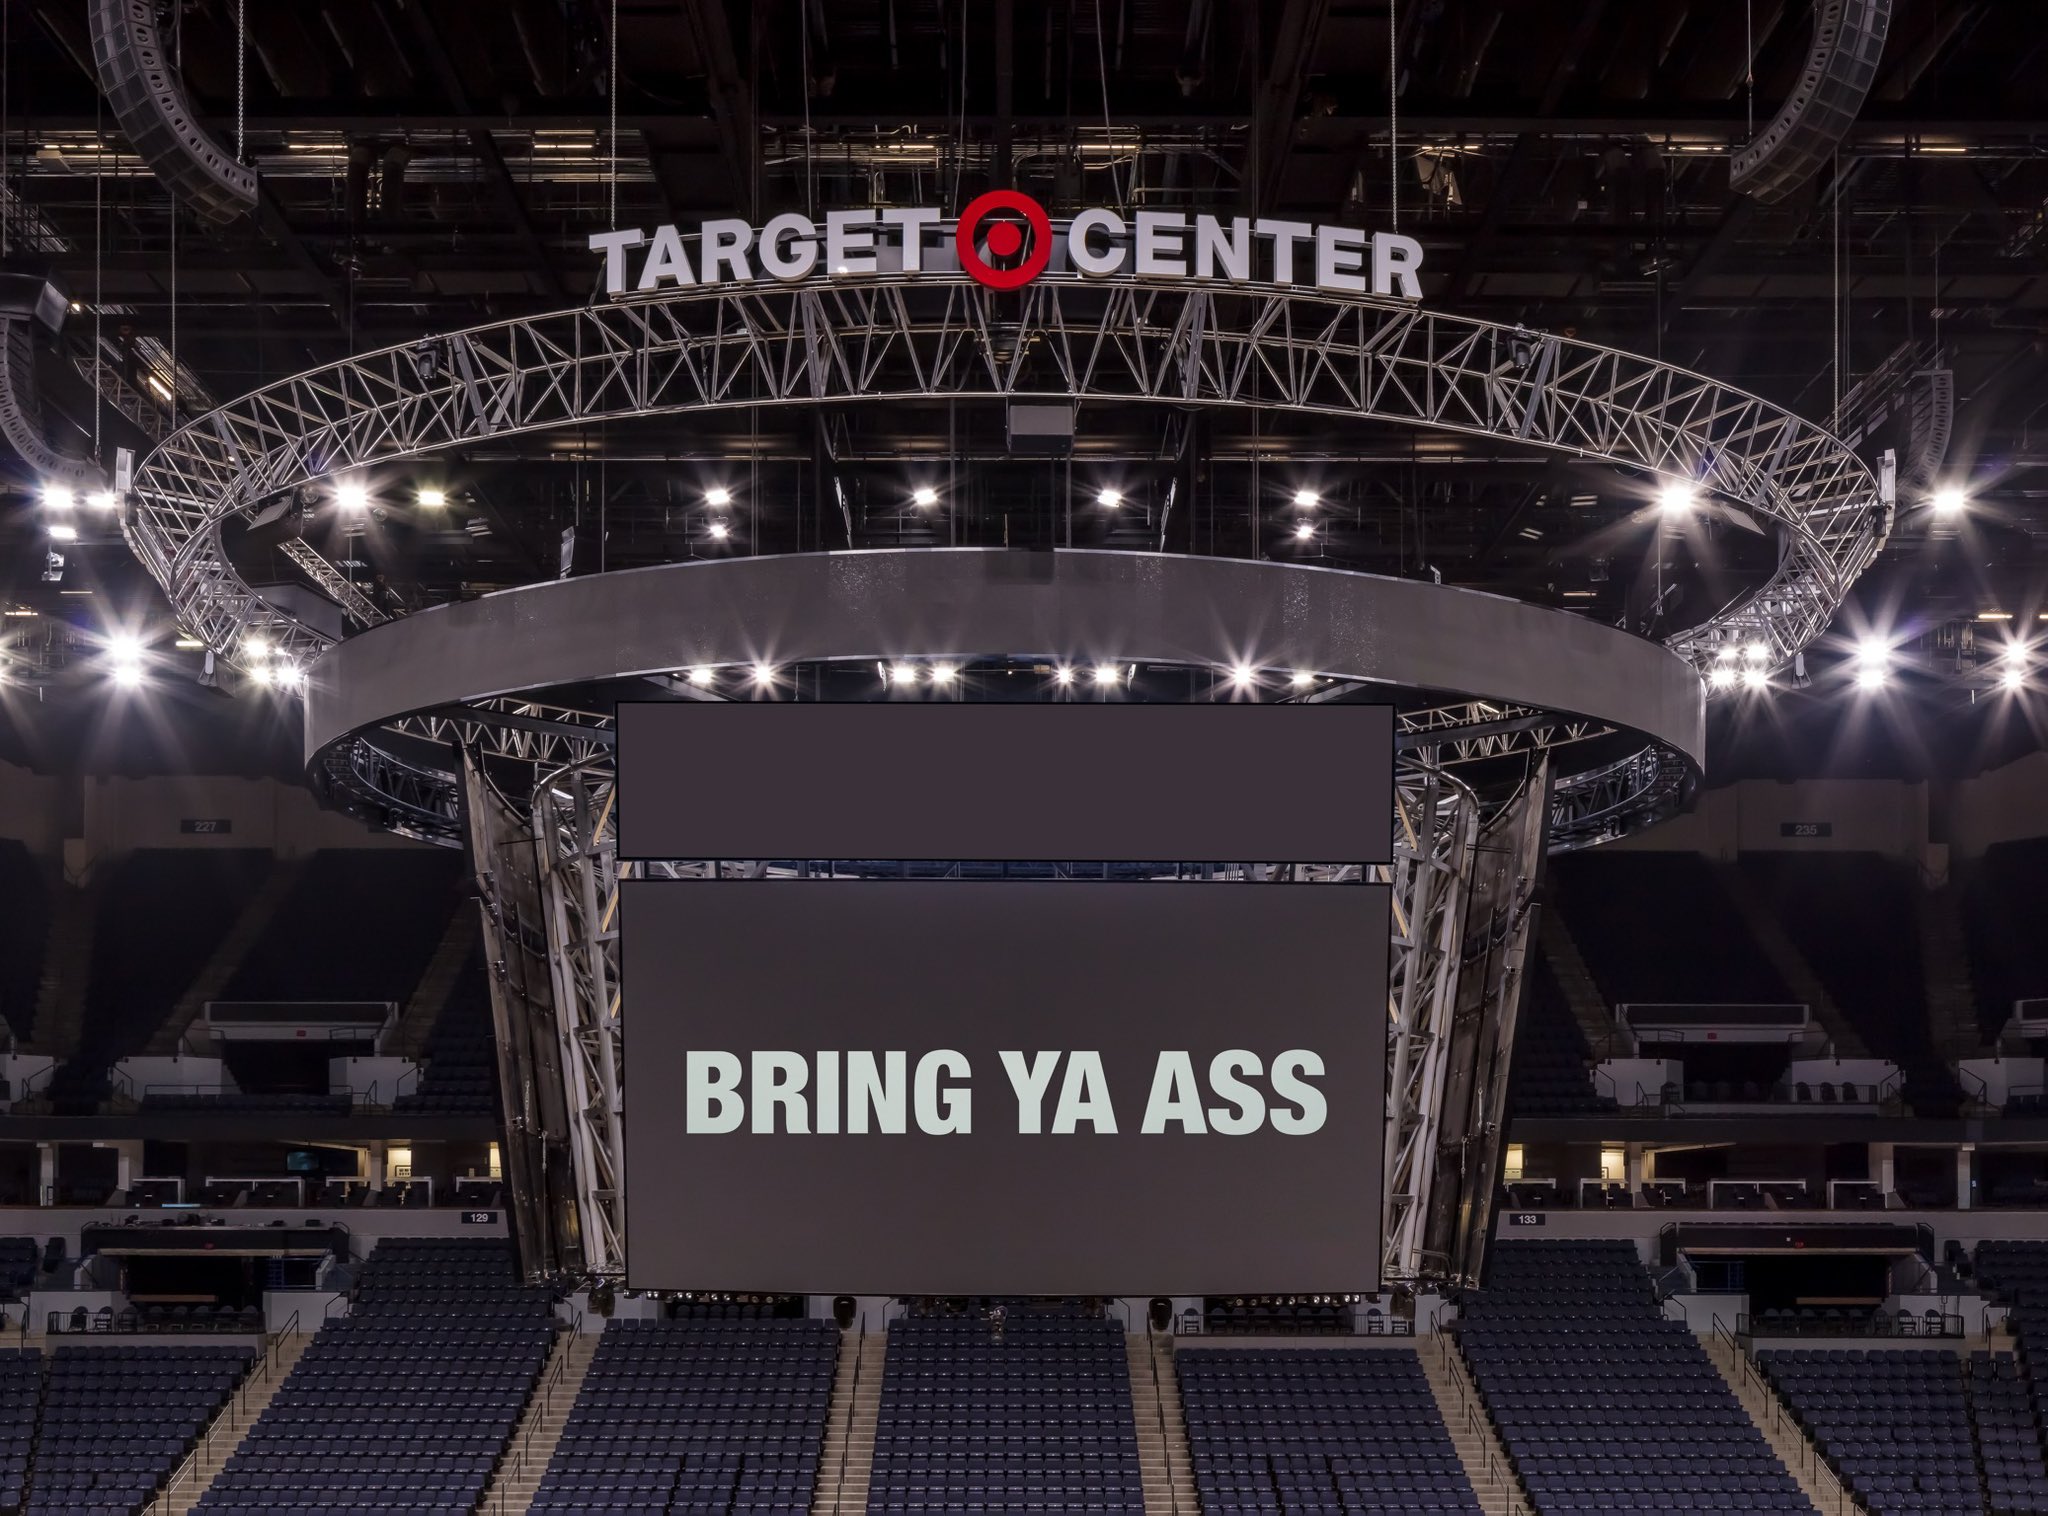 A photo of the scoreboard screen at the Target Center in Minneapolis displaying the words "Bring Ya Ass"